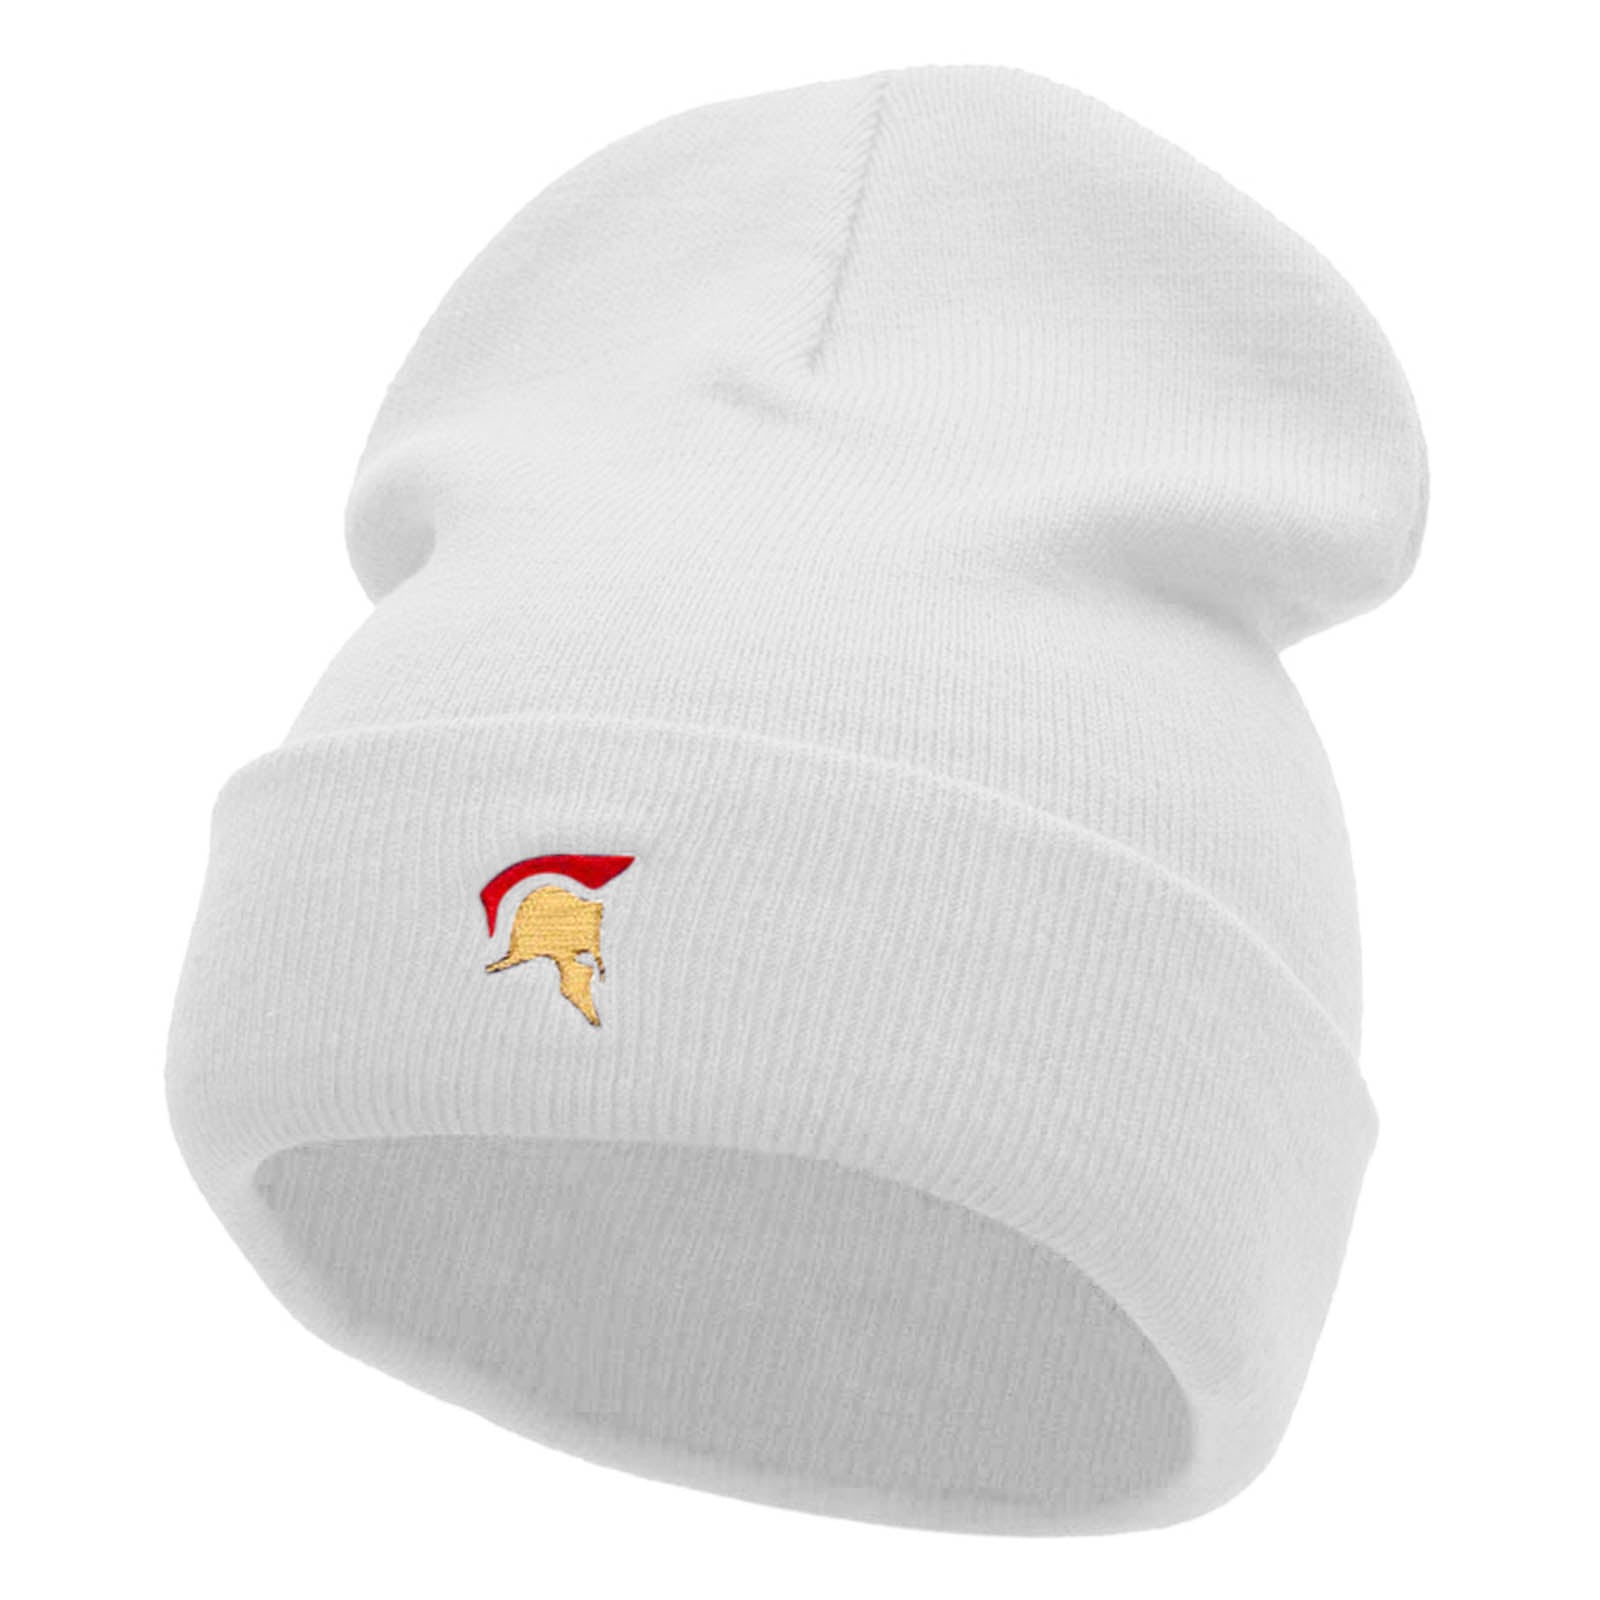 The Trojan Helmet Embroidered 12 Inch Long Knitted Beanie - White OSFM